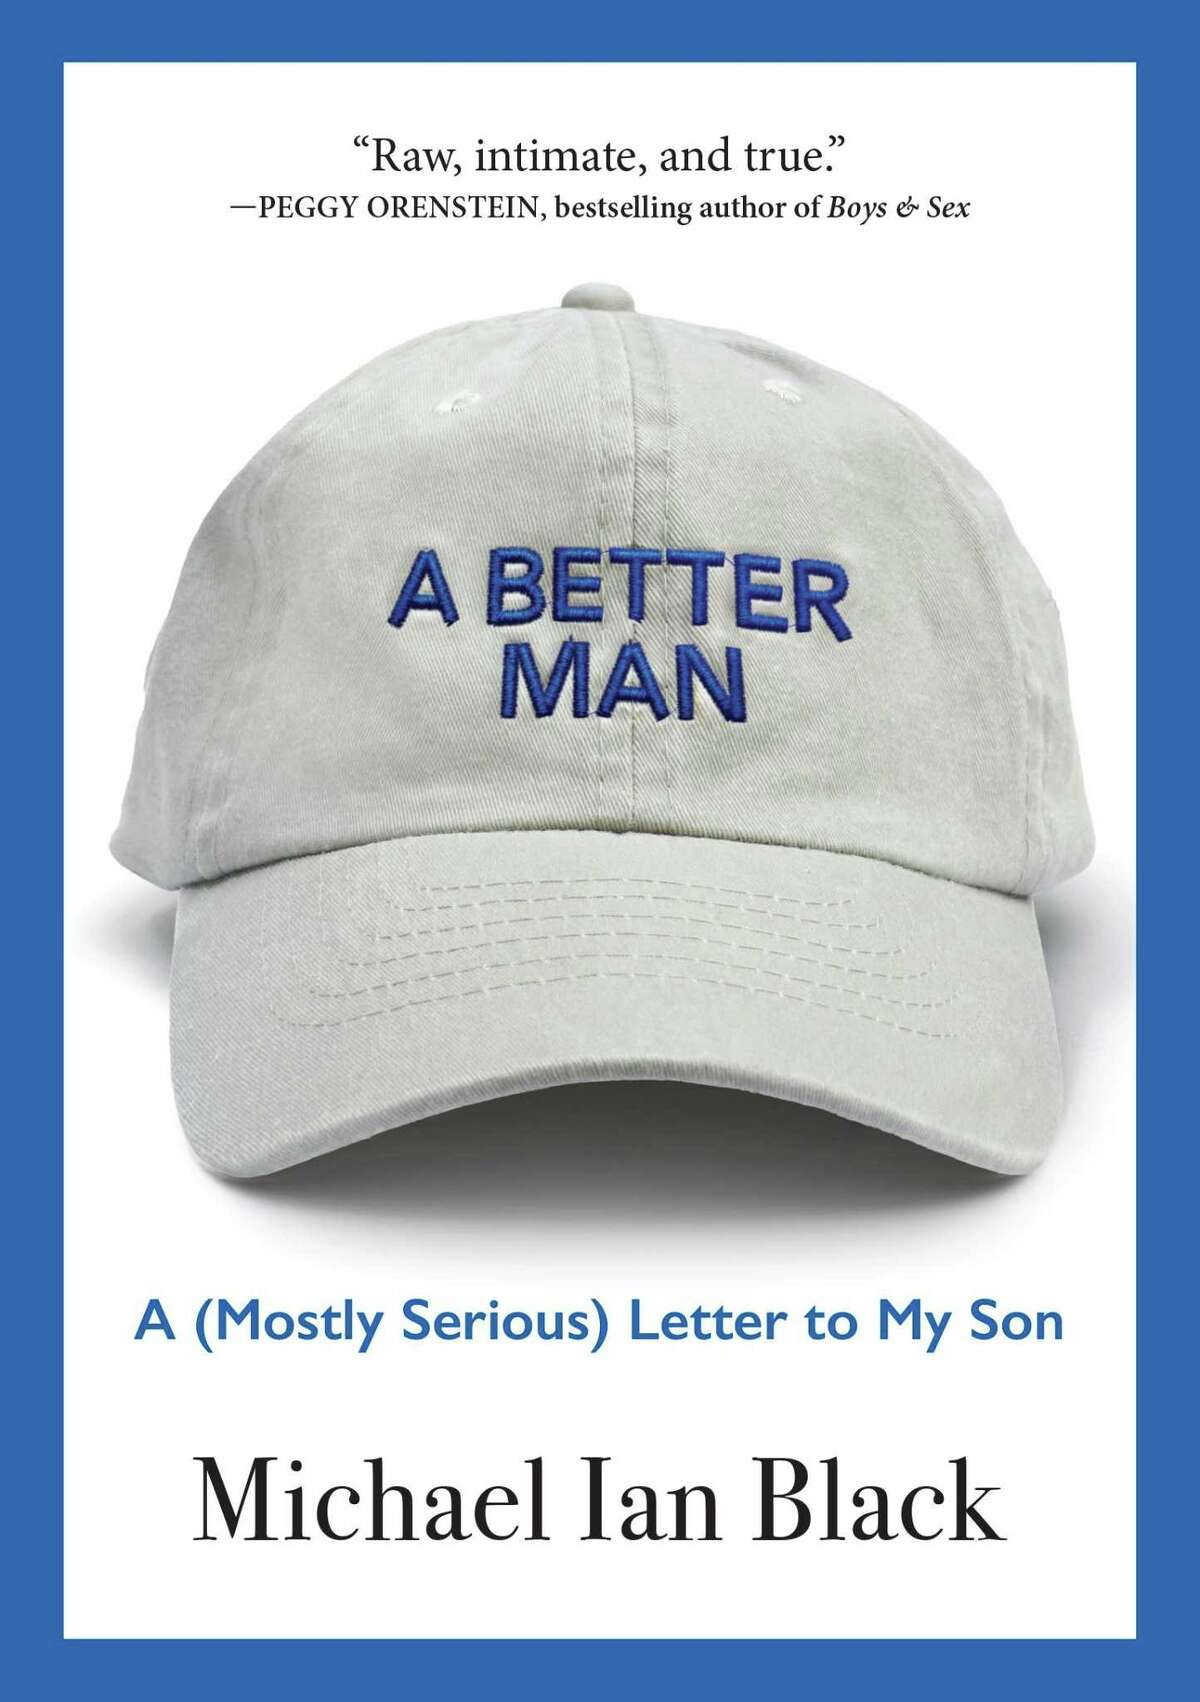 Comedian Michael Ian Black published his novel A Better Man: A (Mostly Serious) Letter to My Son” earlier this fall.